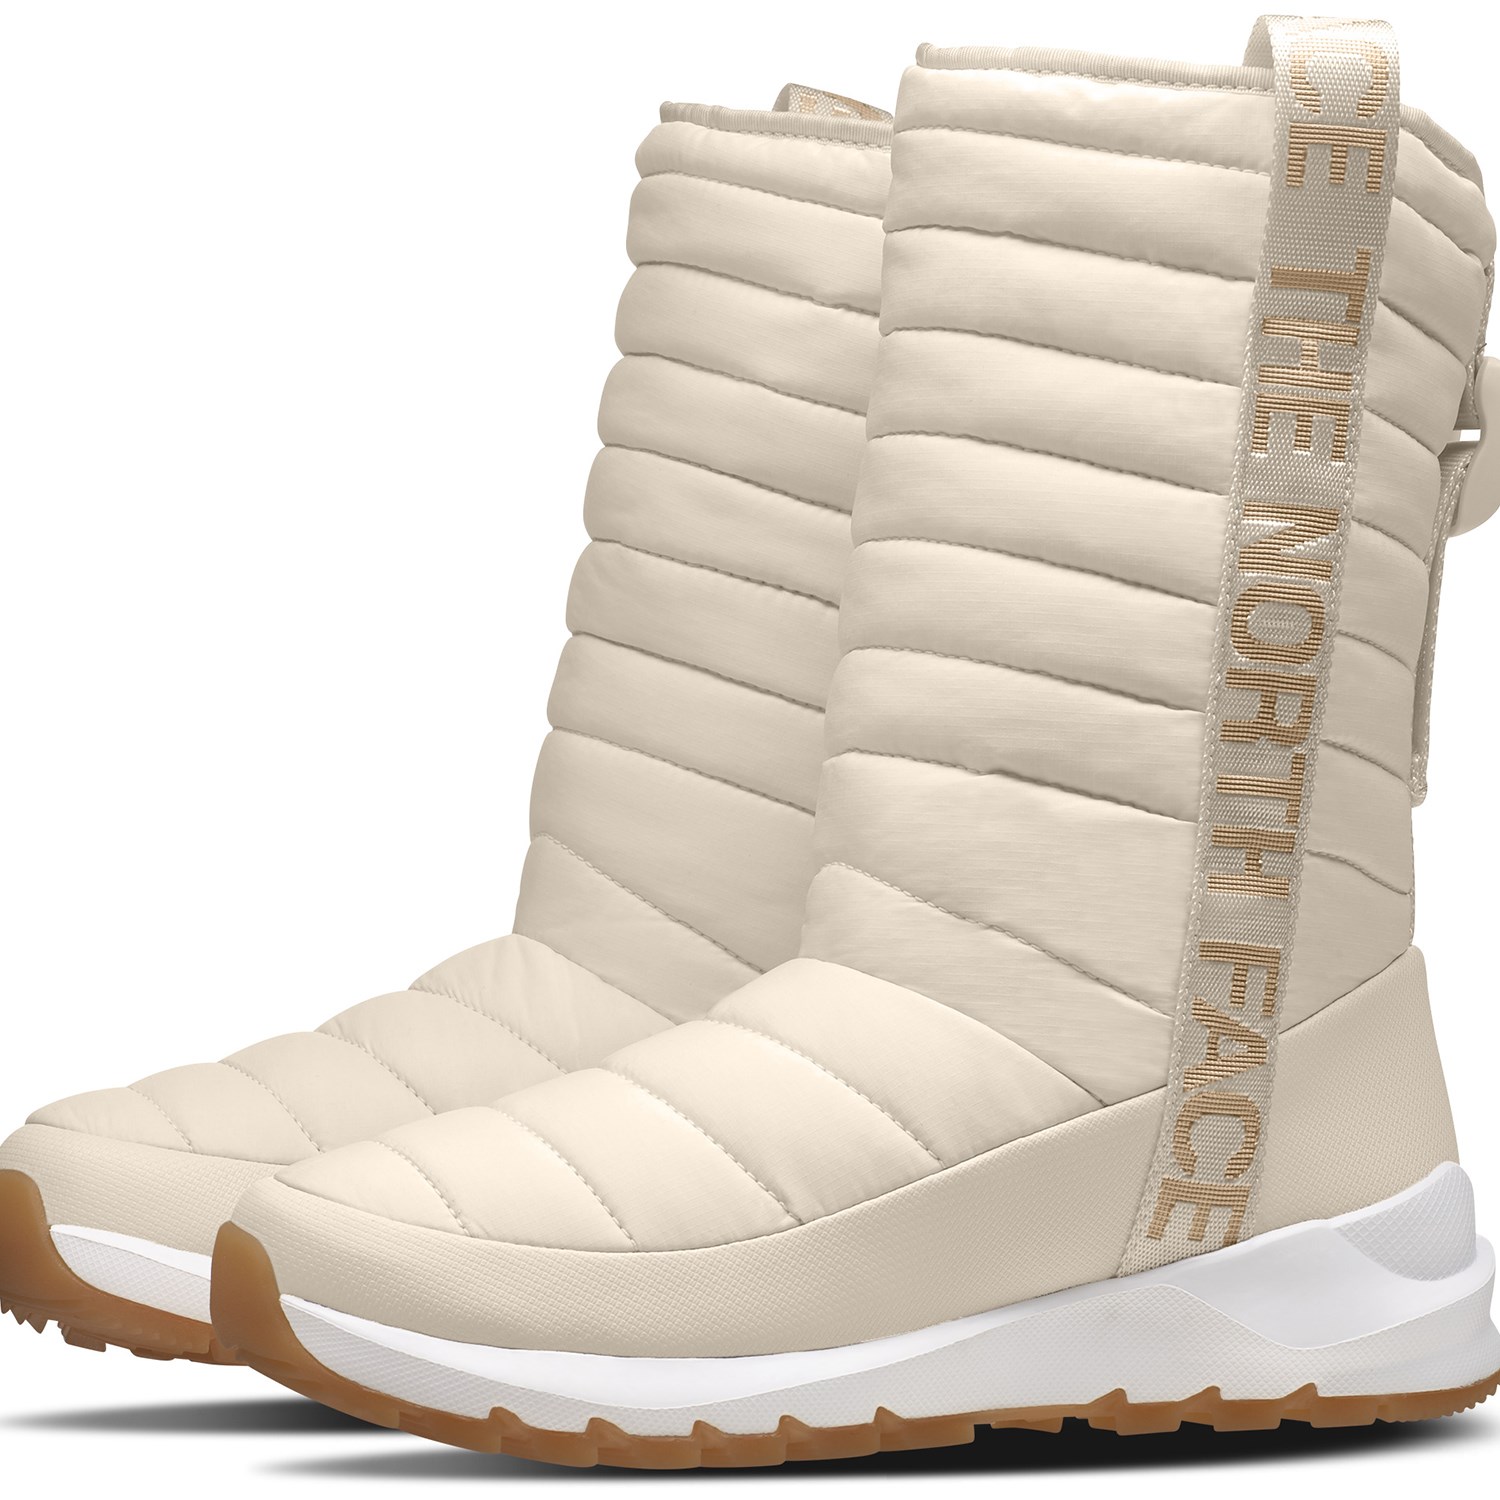 thermoball boots